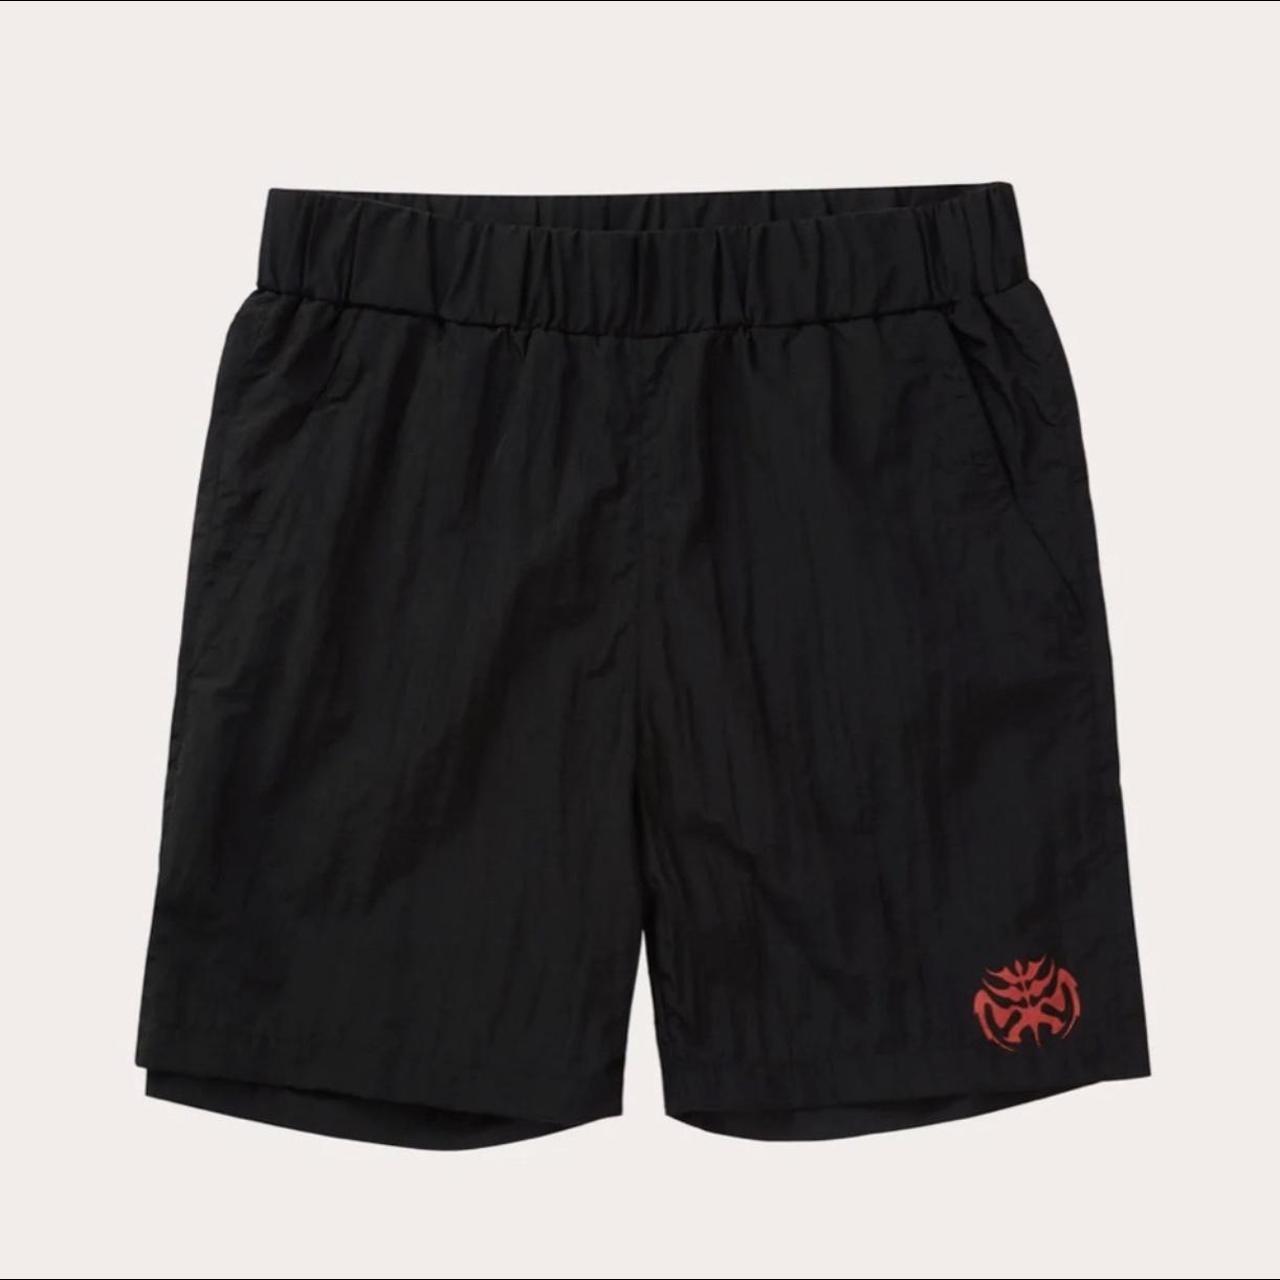 Dropdead Women's Black and Red Shorts (2)